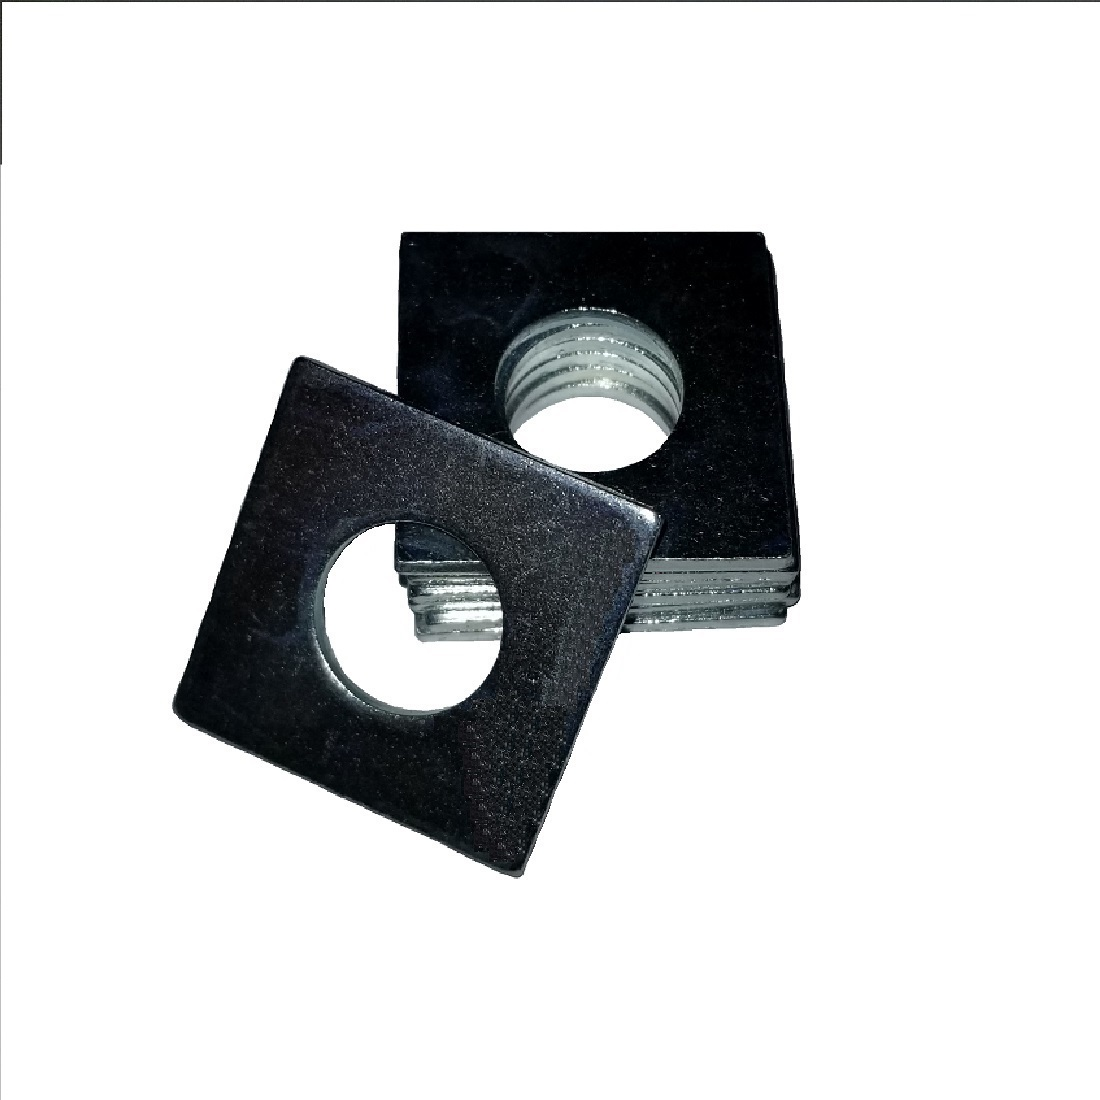 Square OD Washer - 0.344 ID, 0.750 OD, 0.054 Thick, Low Carbon Steel - Soft, Zinc & Clear